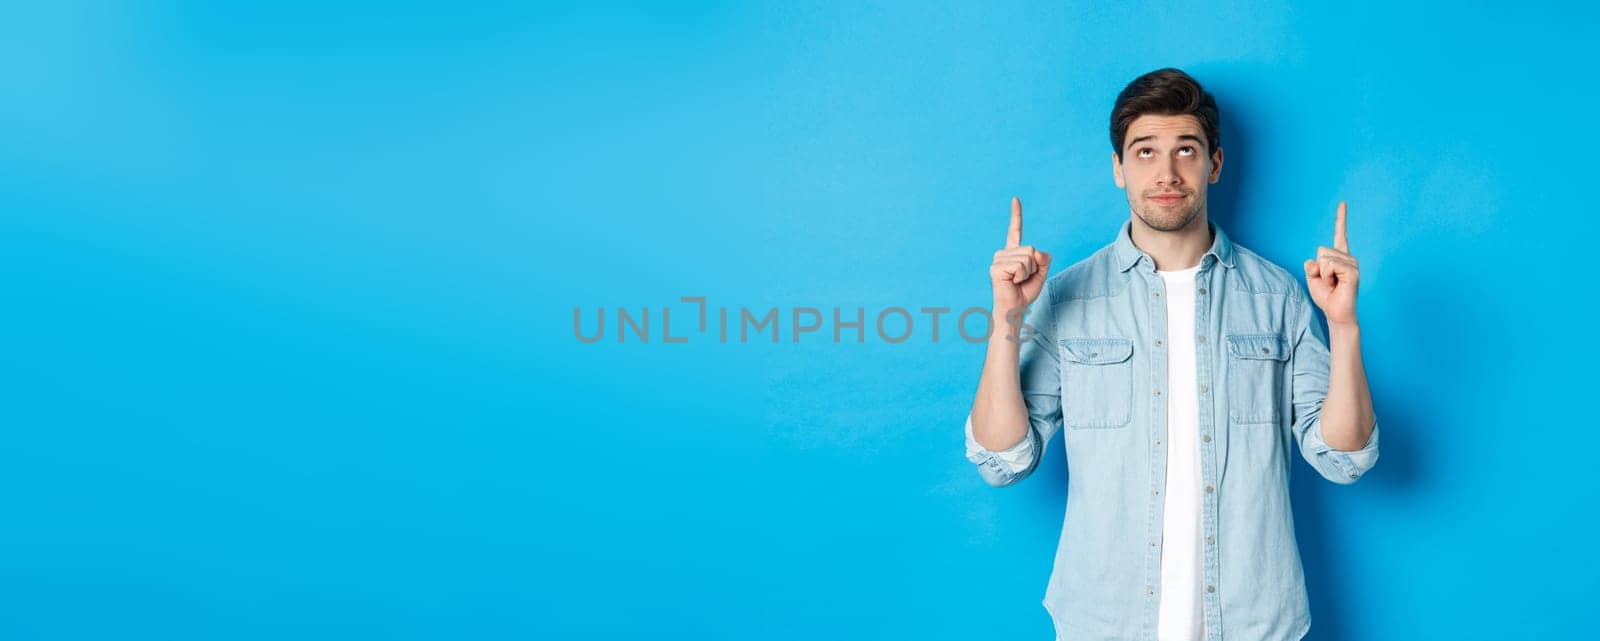 Portrait of displeased and skeptical male model pointing fingers up, looking at something unpleasant, standing against blue background.